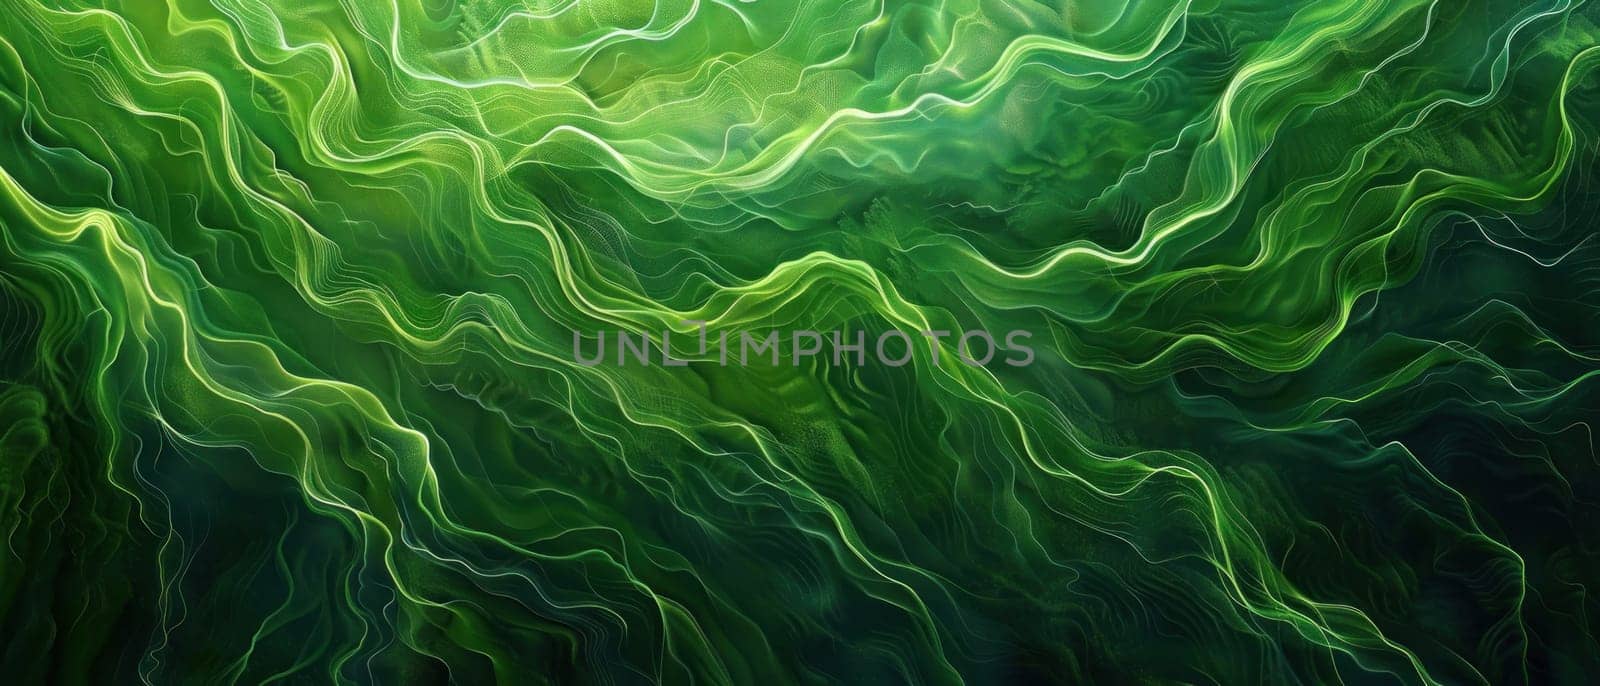 Abstract Organic Green Lines Hum with Earth Quiet Energy Concept Wallpaper Background Illustration.